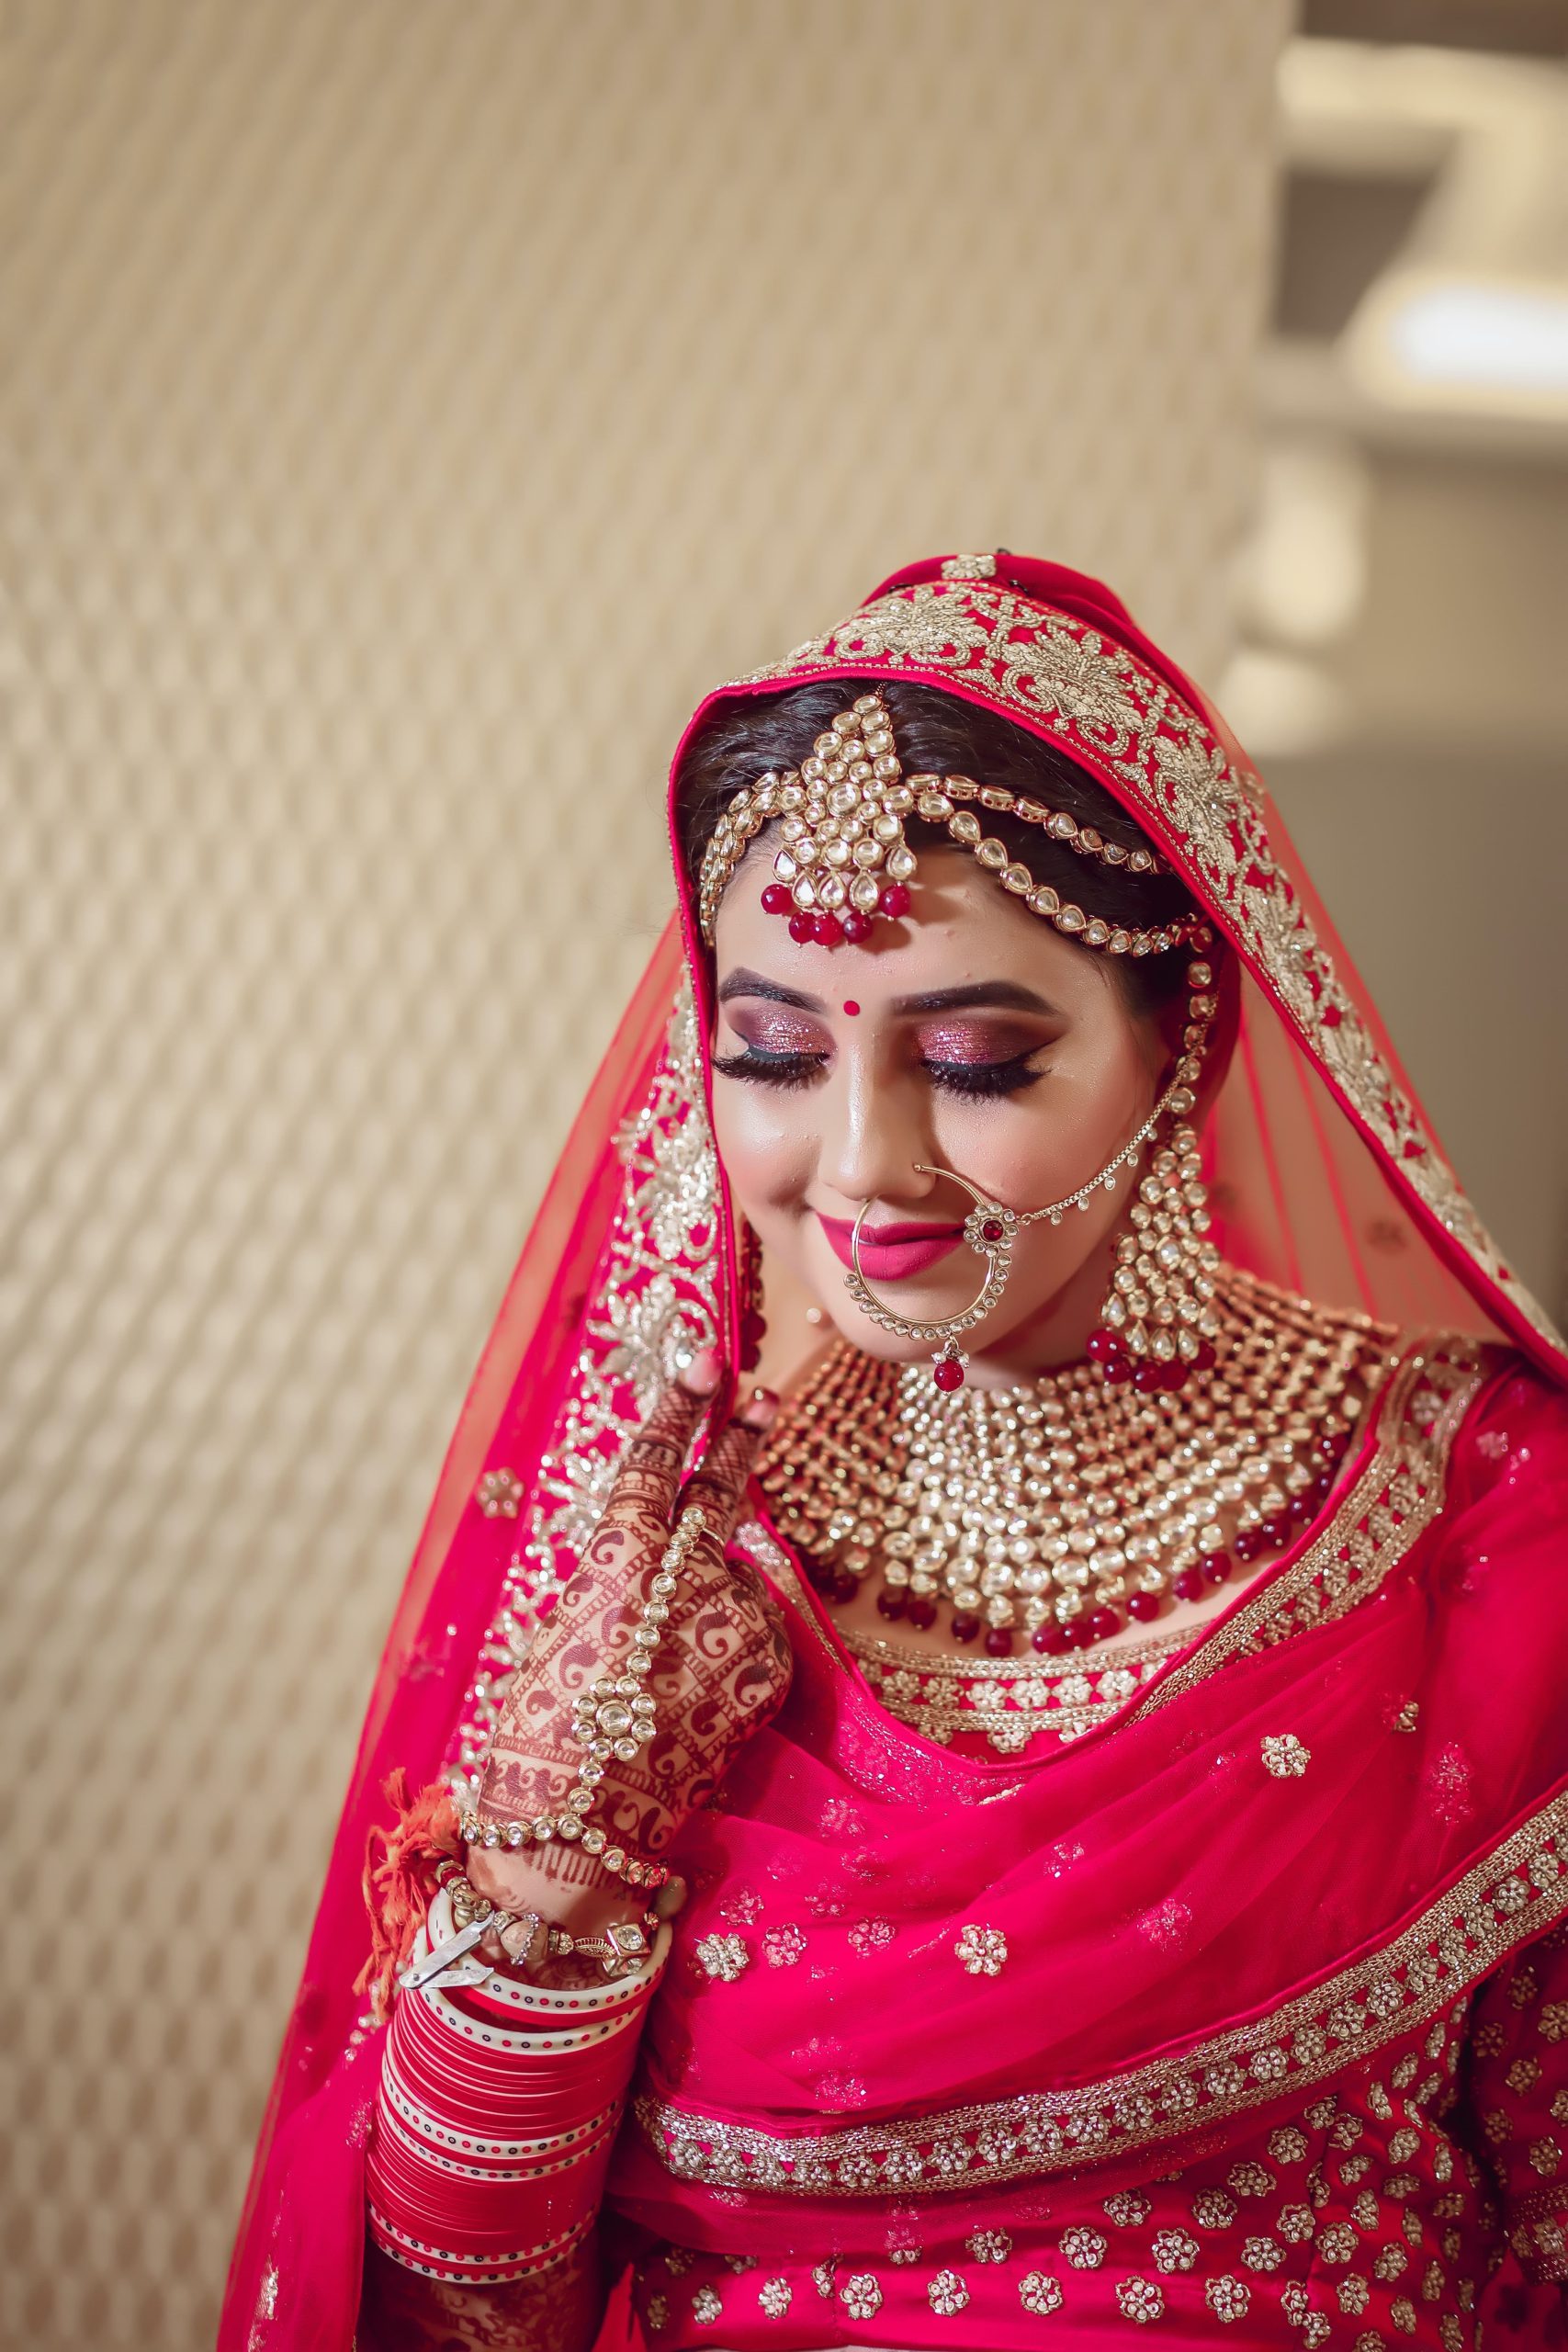 The Indian Bride’s Wedding Dress Guide